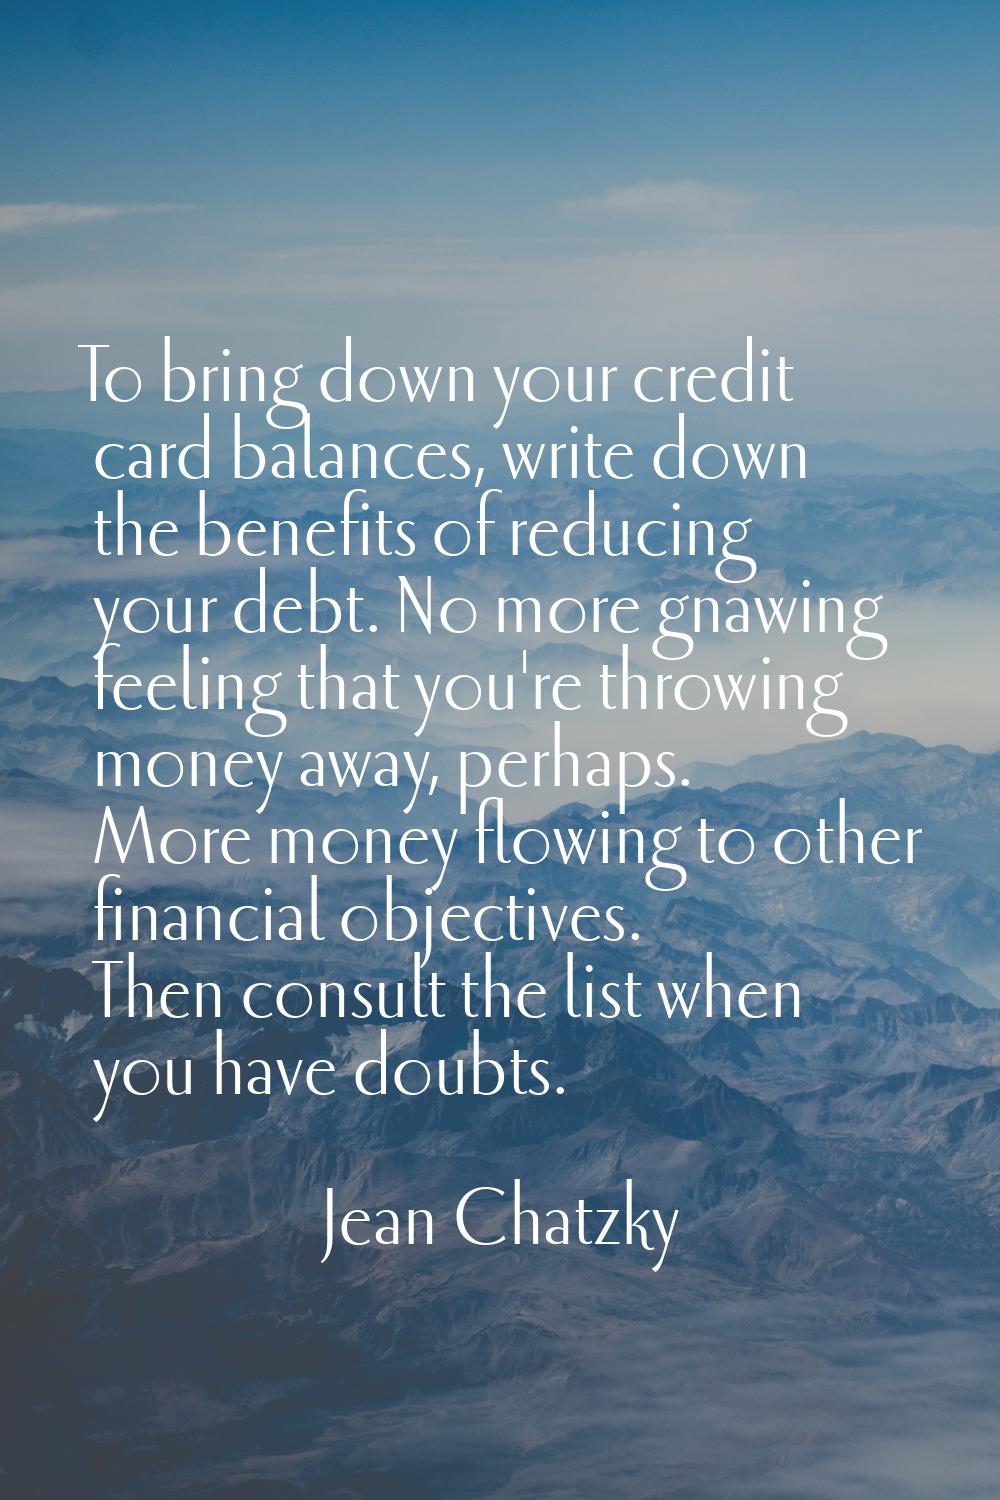 To bring down your credit card balances, write down the benefits of reducing your debt. No more gna